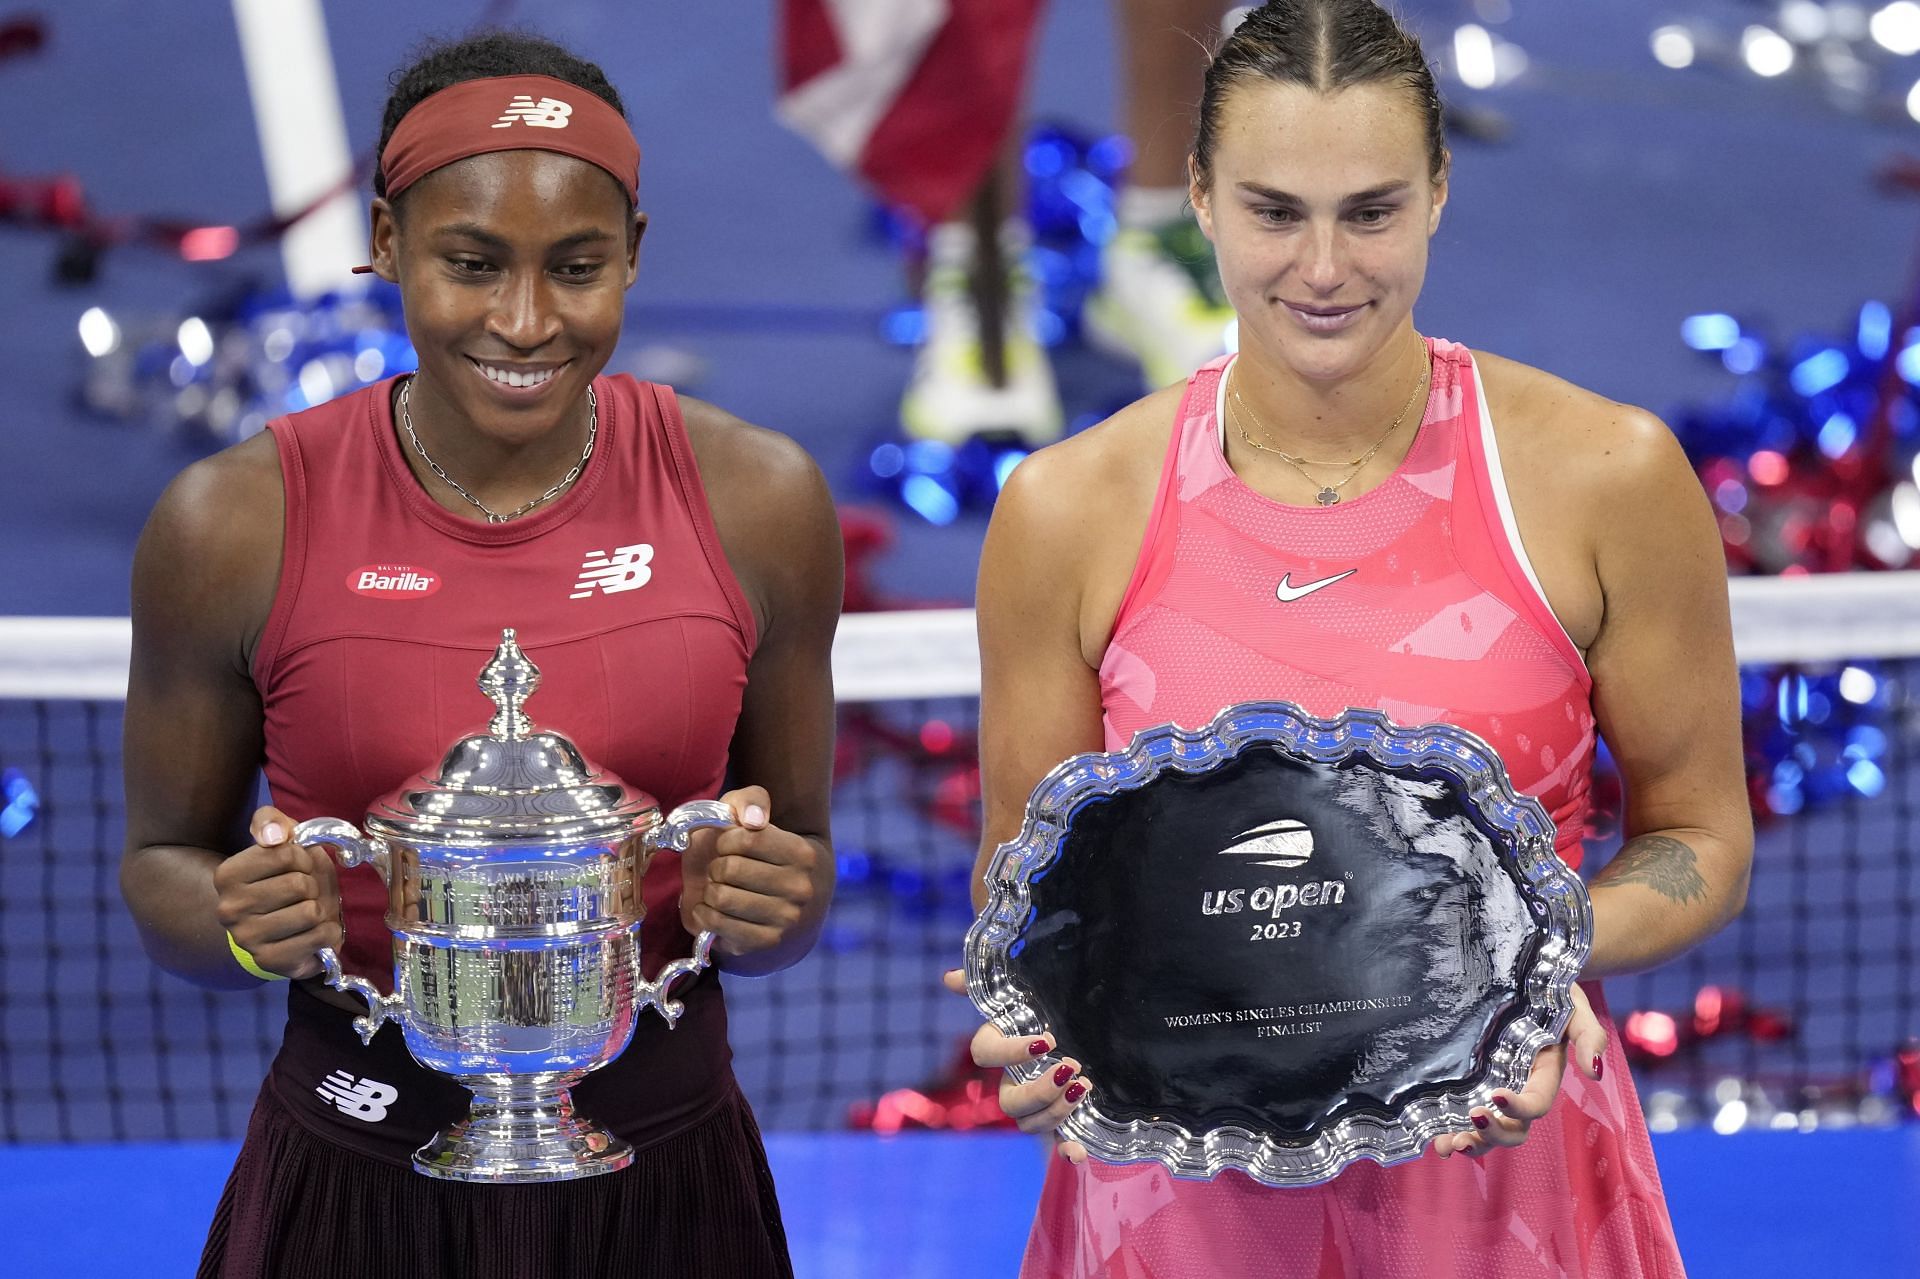 Aryna Sabalenka pictured with her US Open trophy alongside Coco Gauff